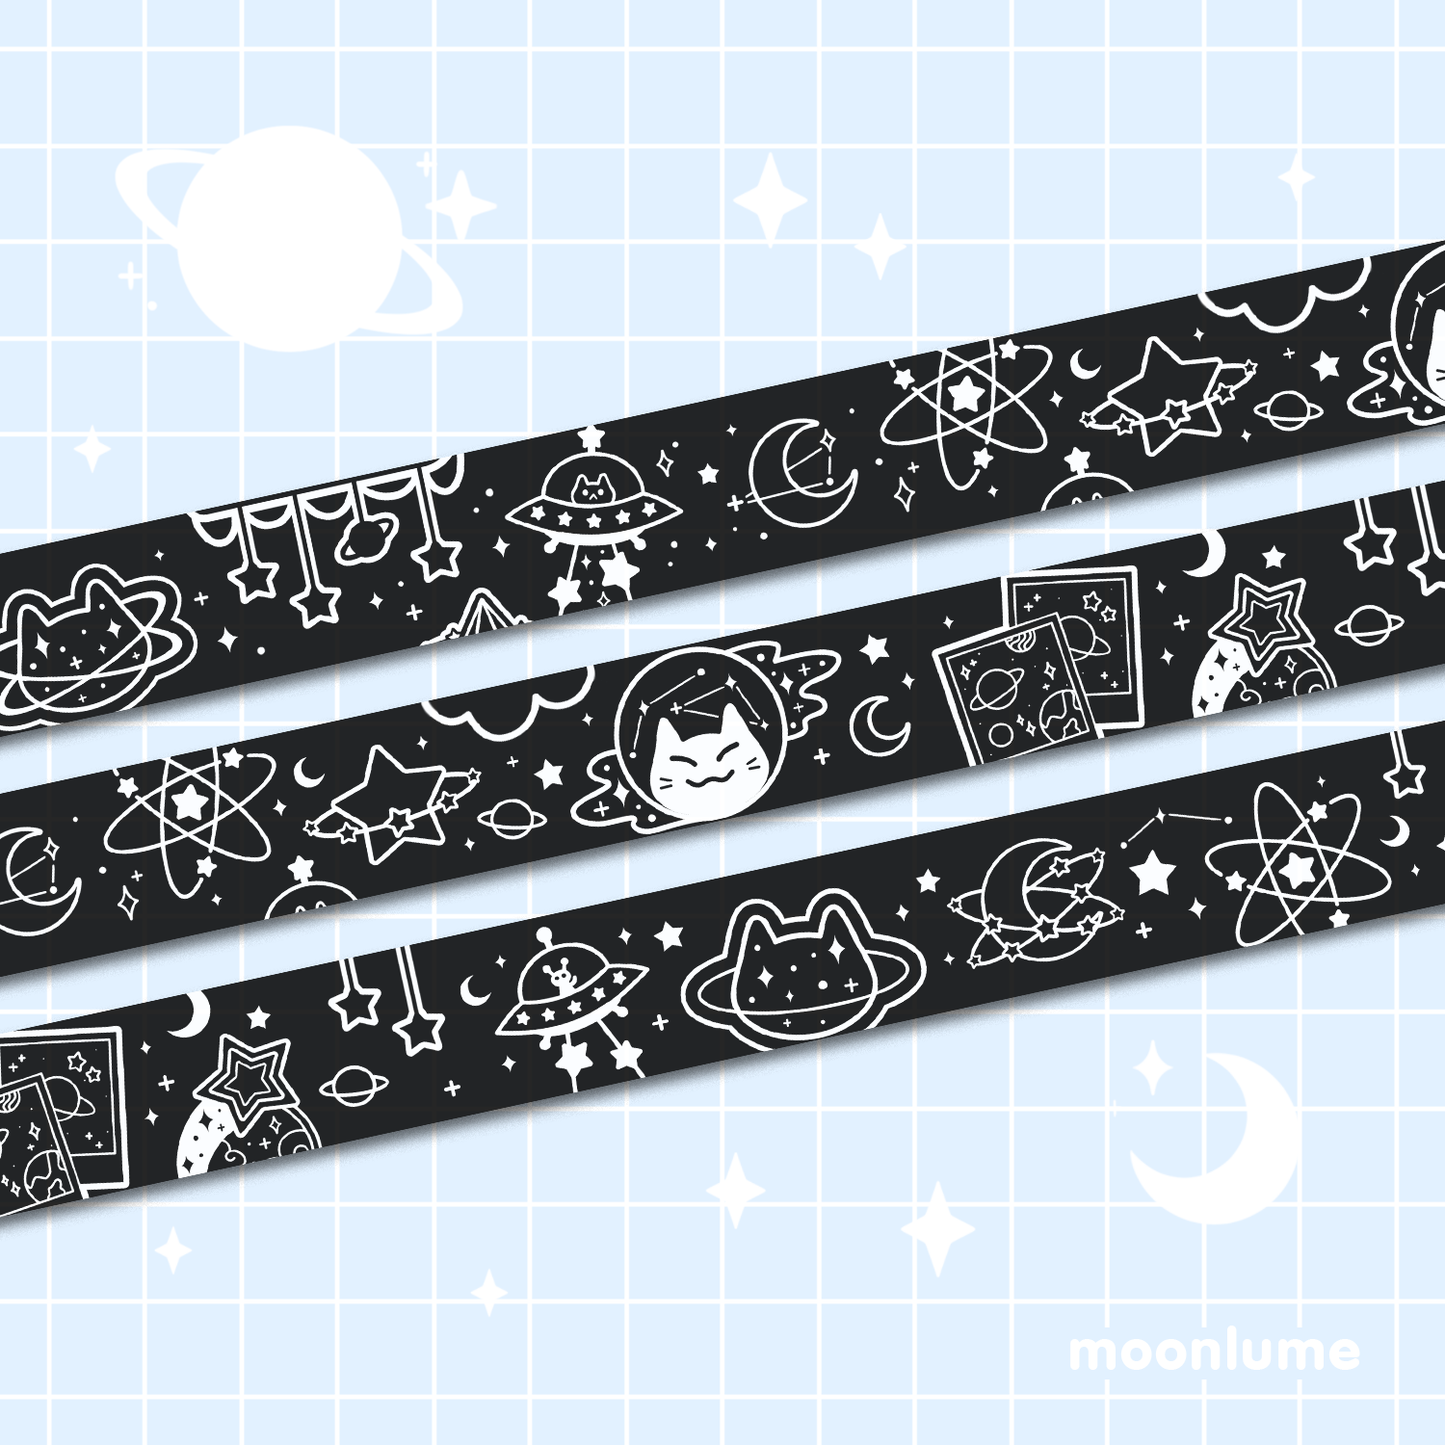 Meowter Space - space cat themed washi tape